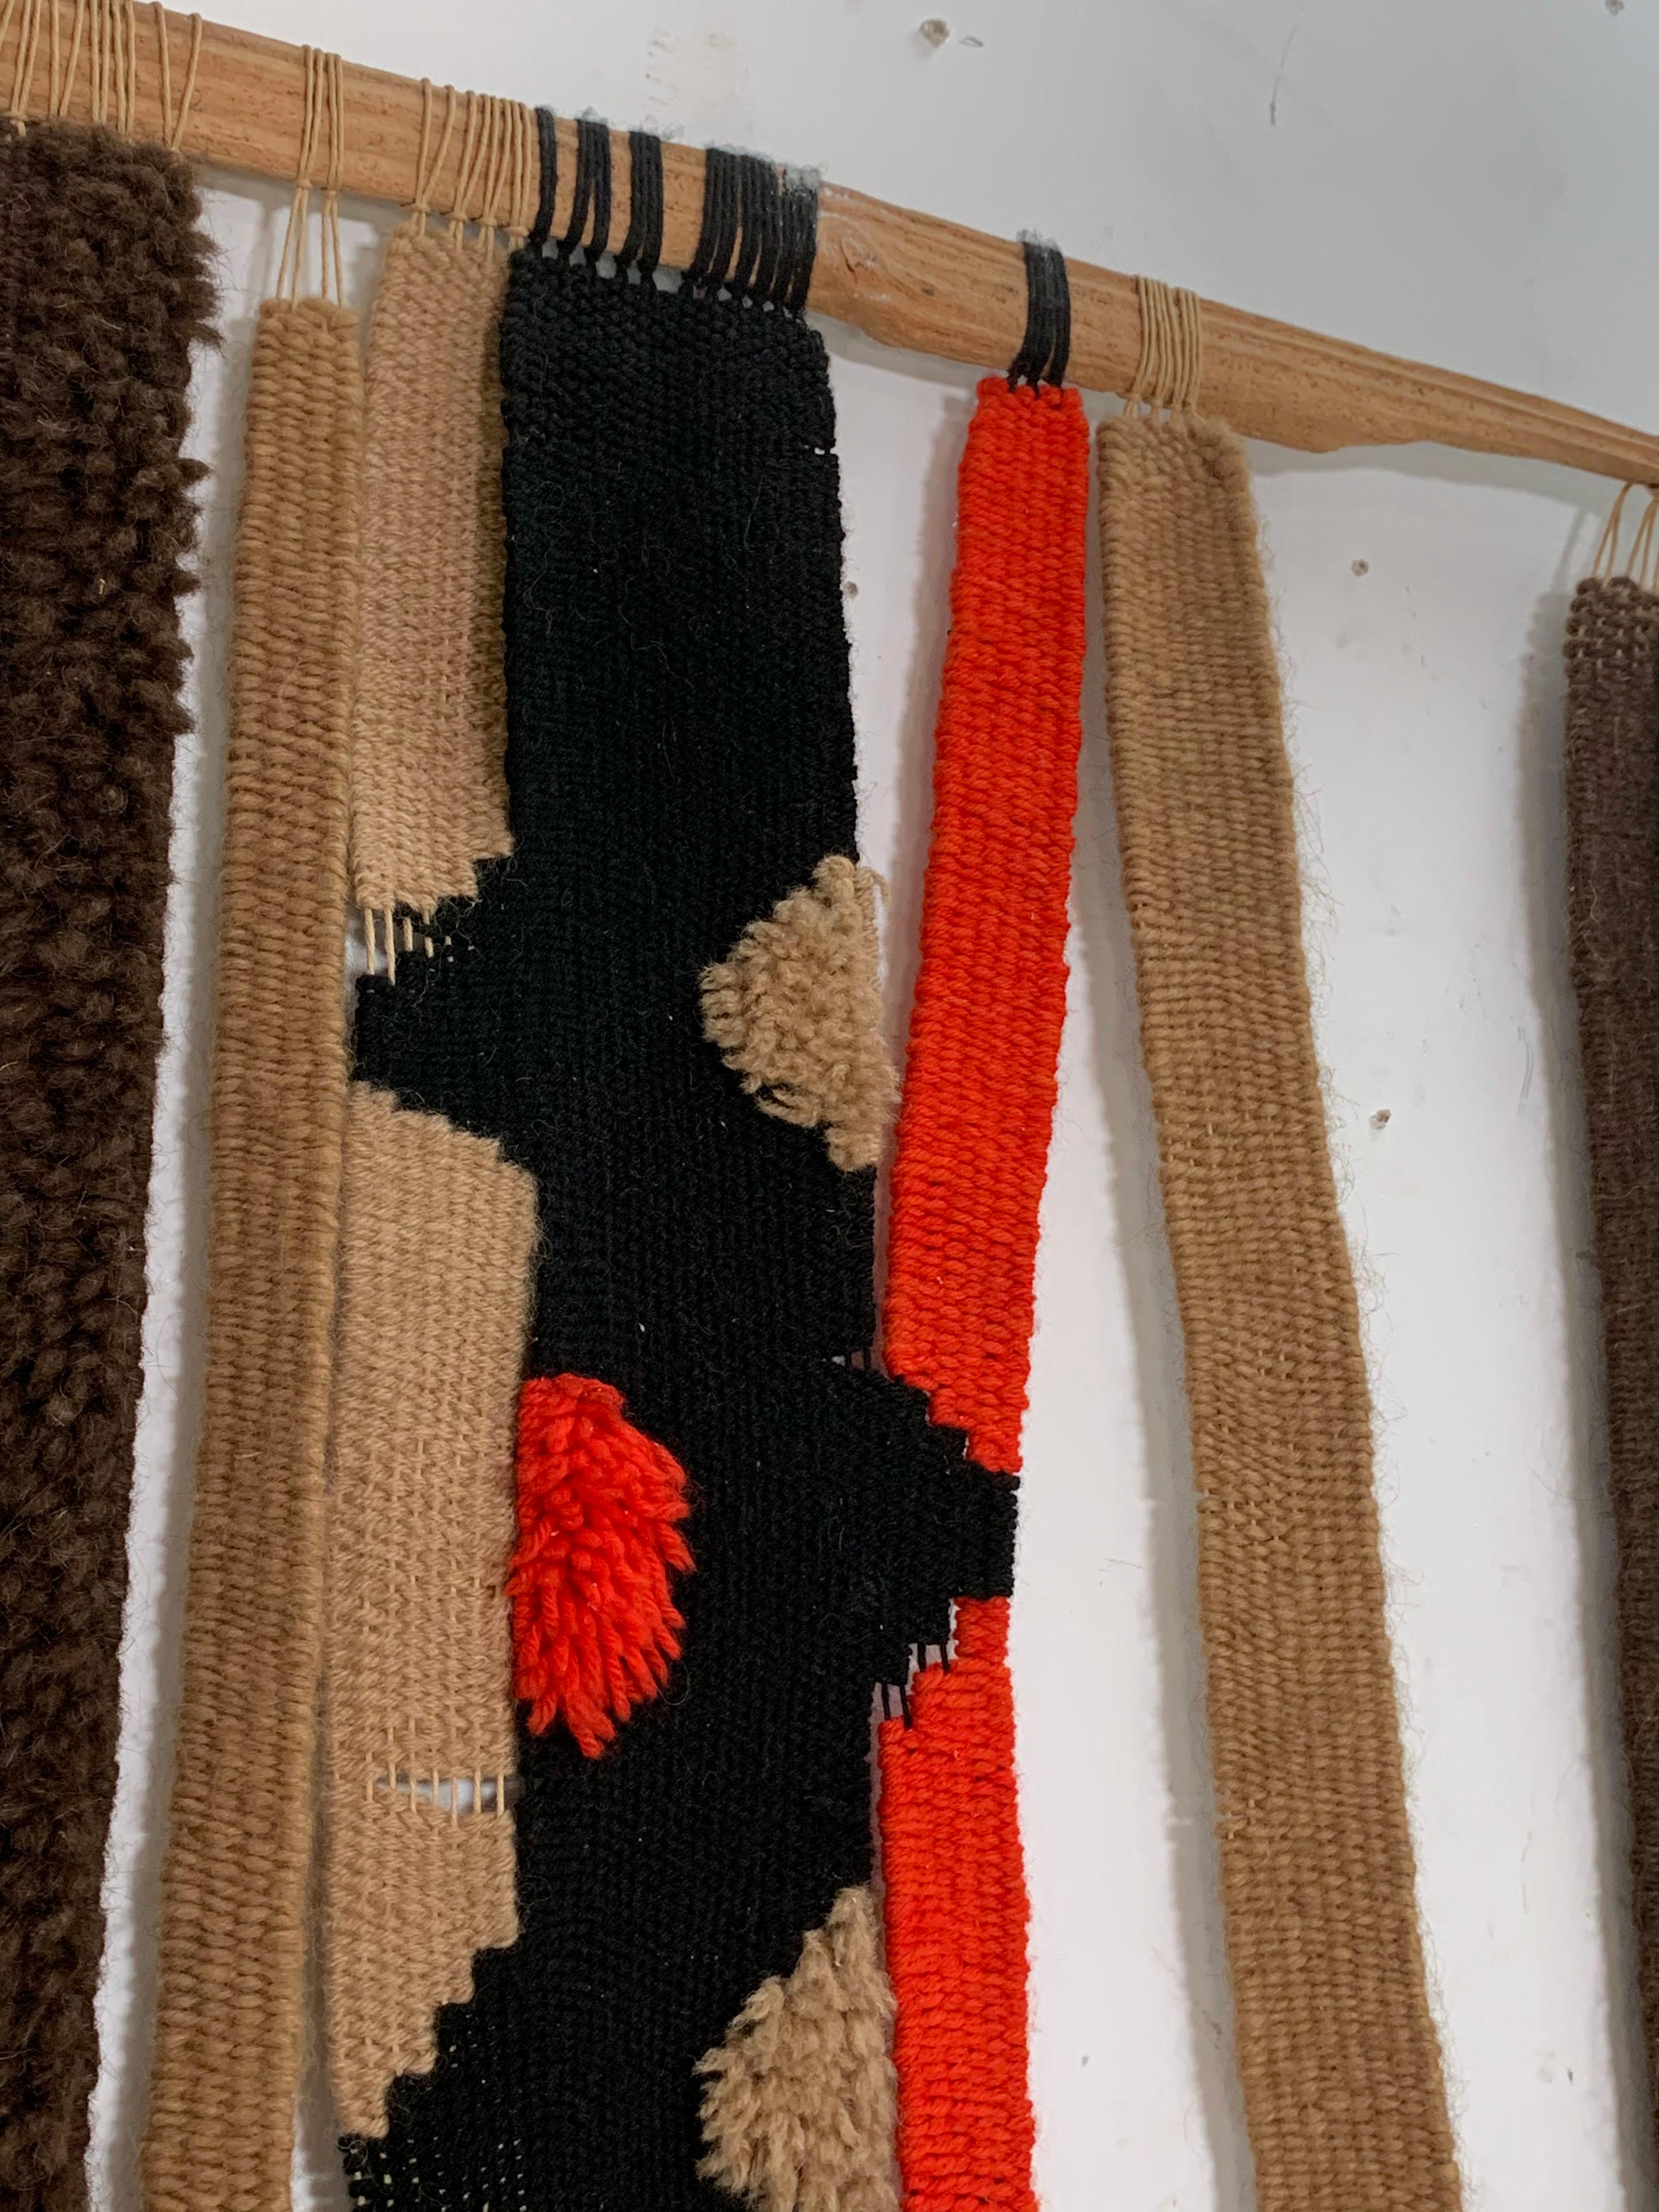 Mid-Century Modern Handmade Woven Wall Hanging Textile Art, circa 1960s For Sale